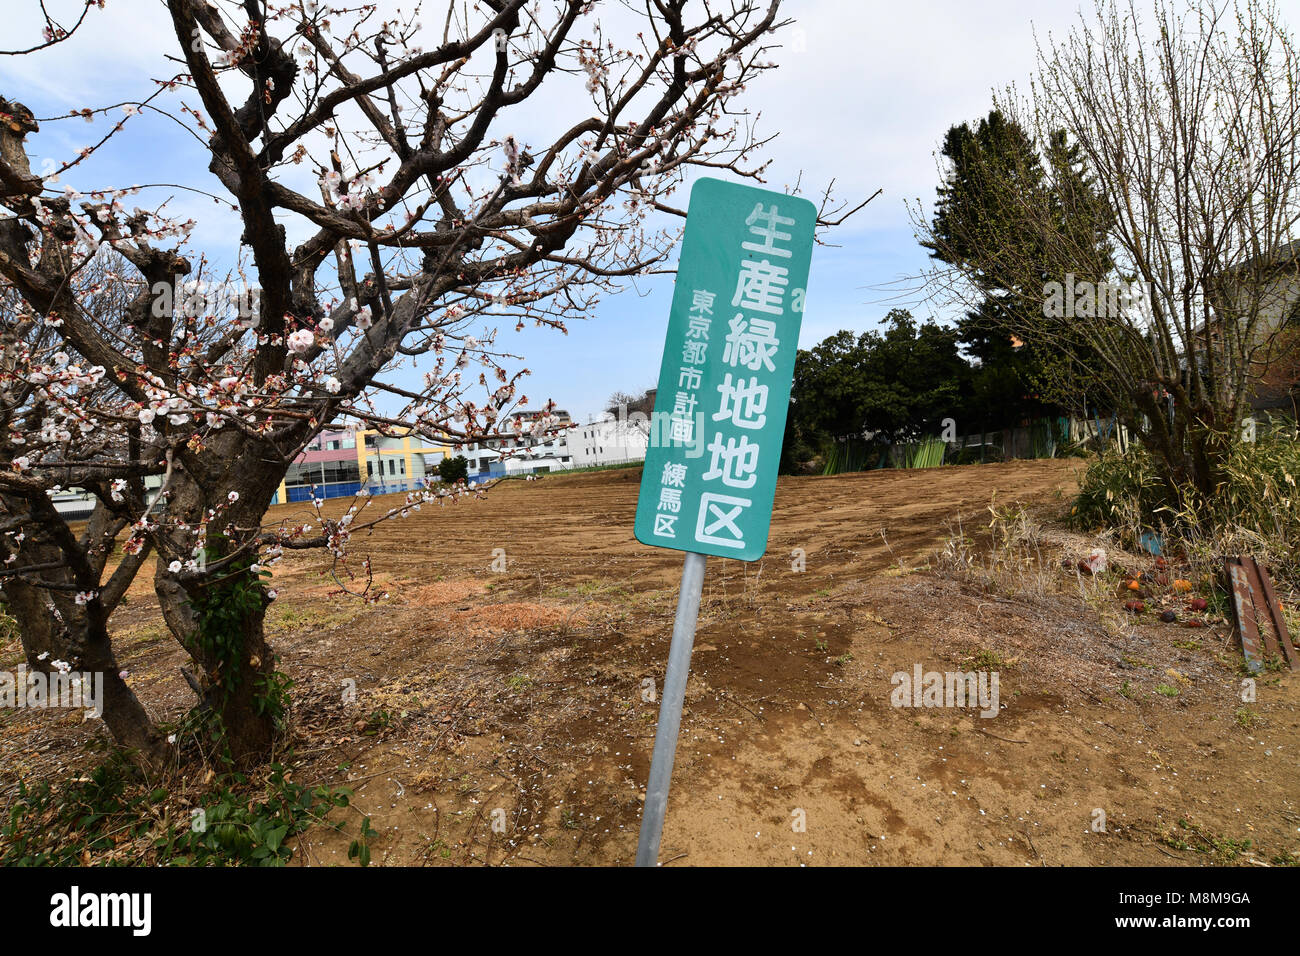 Tokyo, Japan. 18th Mar, 2018. A patch of so-called Productive Green Area lies in the residential area of Tokyo's Nerima Ward on Sunday, March 18, 2019. The Productive Green Area Law gives urban landowners a substantial property tax break in exchange for not developing their land or using their land commercially. However, the legal designation of most Productive Green Areas is set to expire in 2022, and now the government is looking at ways to prevent these swaths from flooding the commercial real estate market and dragging down land prices. Credit: Natsuki Sakai/AFLO/Alamy Live News Stock Photo